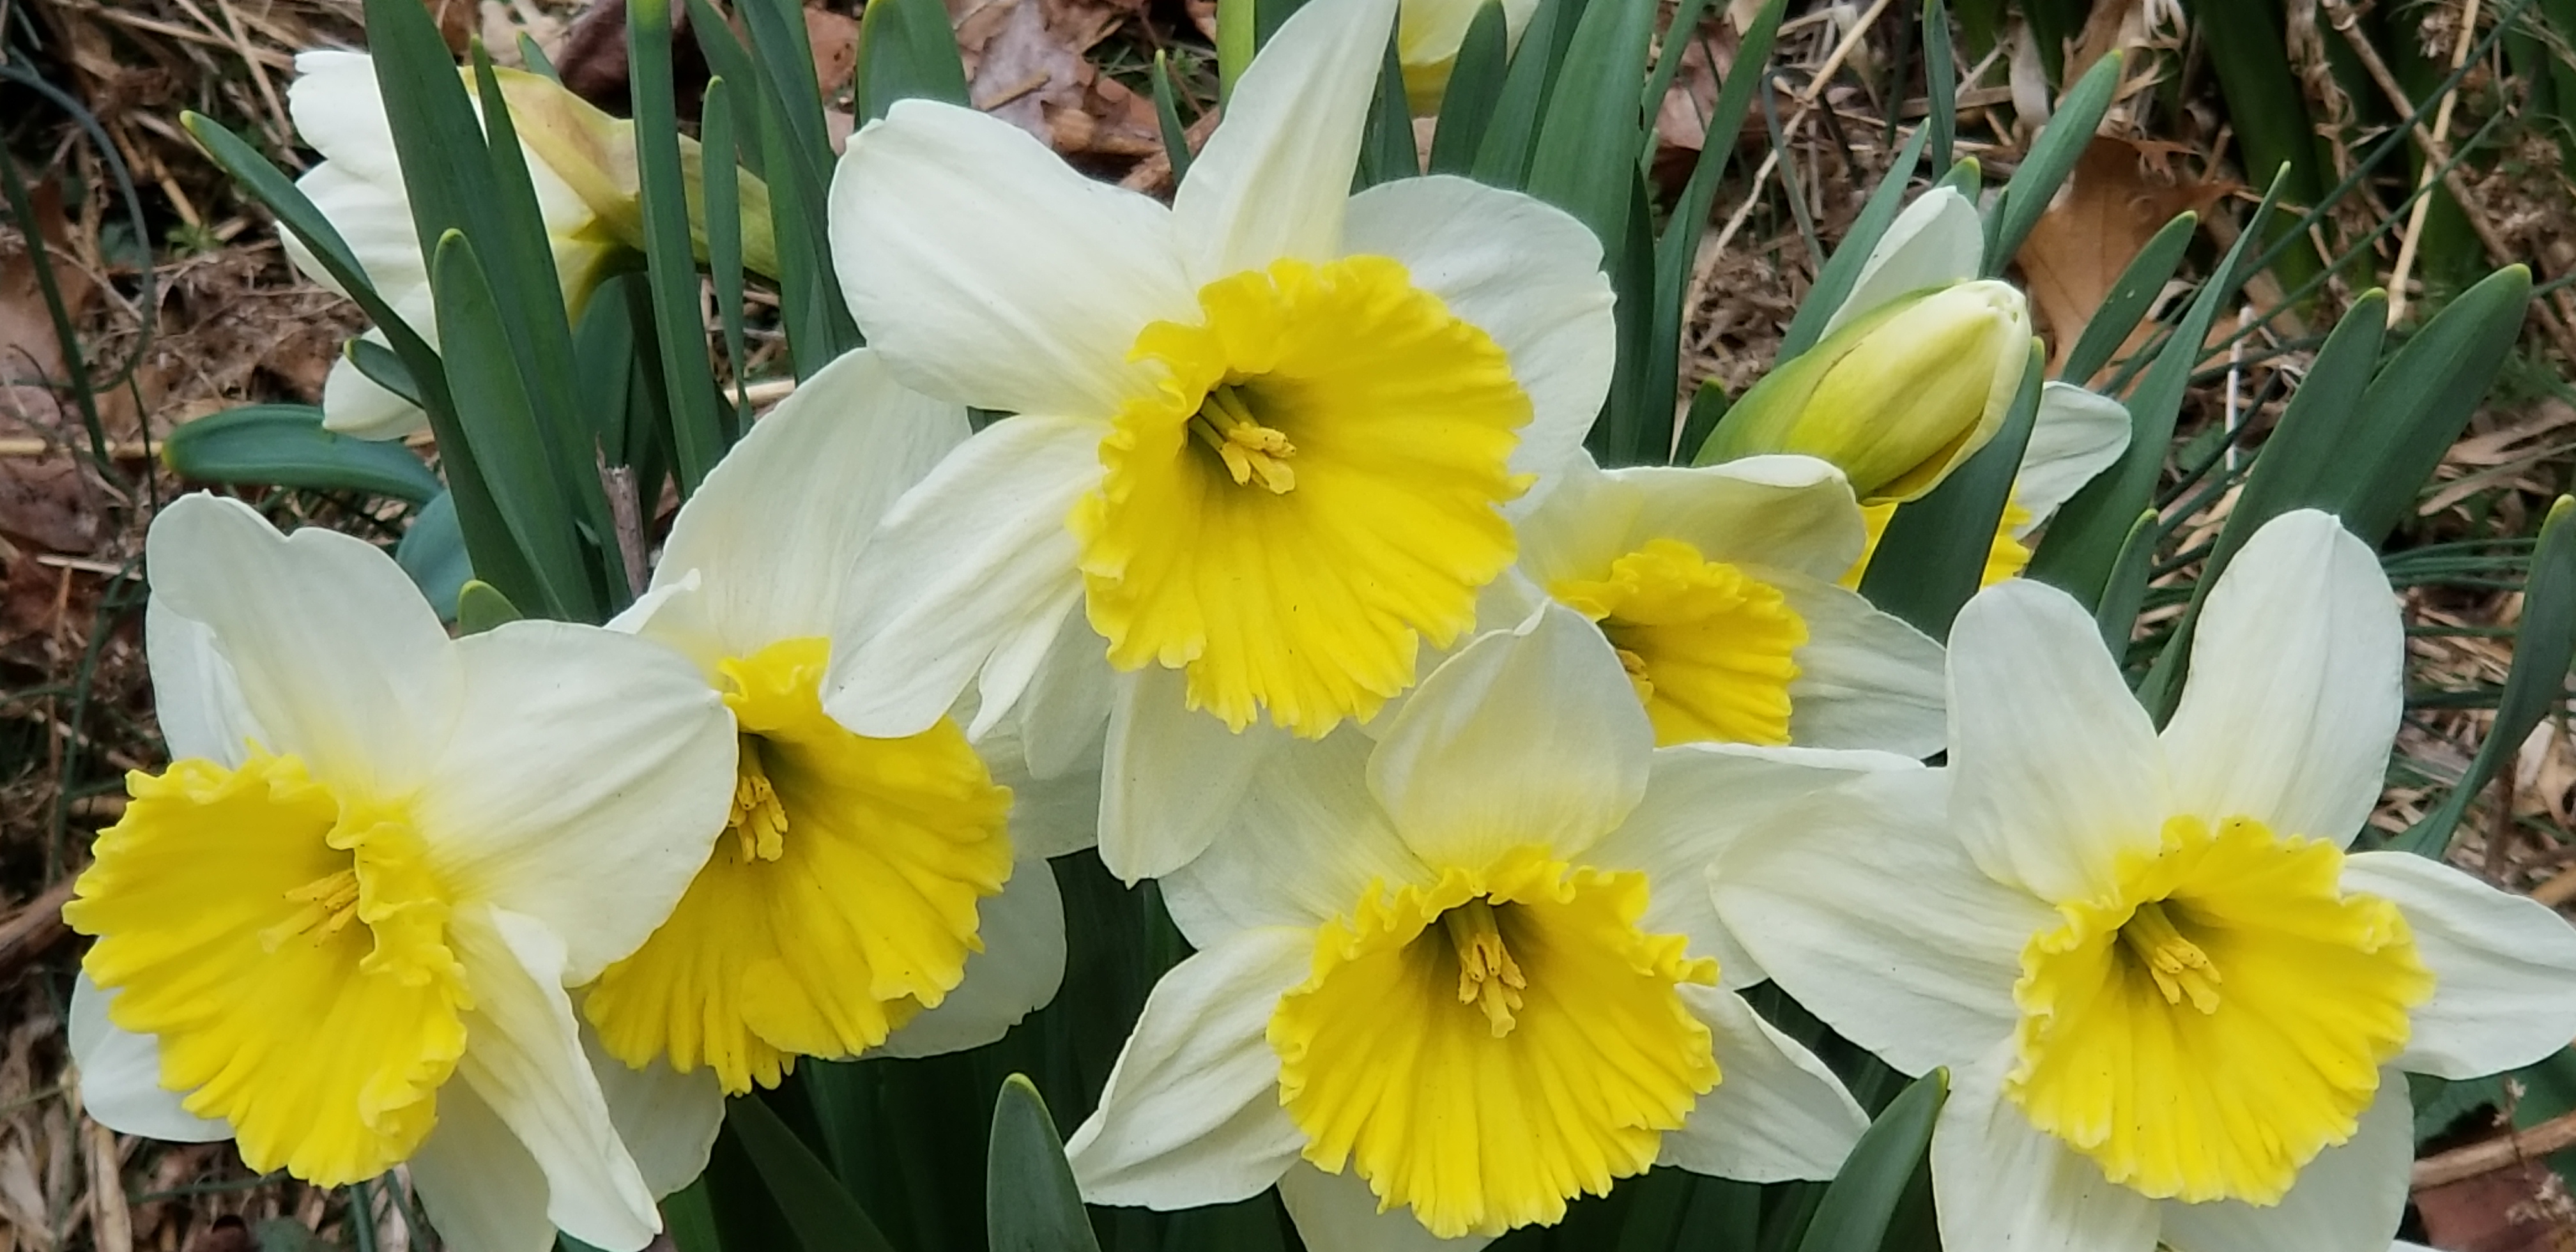 Peak Spring Blooming Watch - Daffodils - Cherry Blossoms, etc